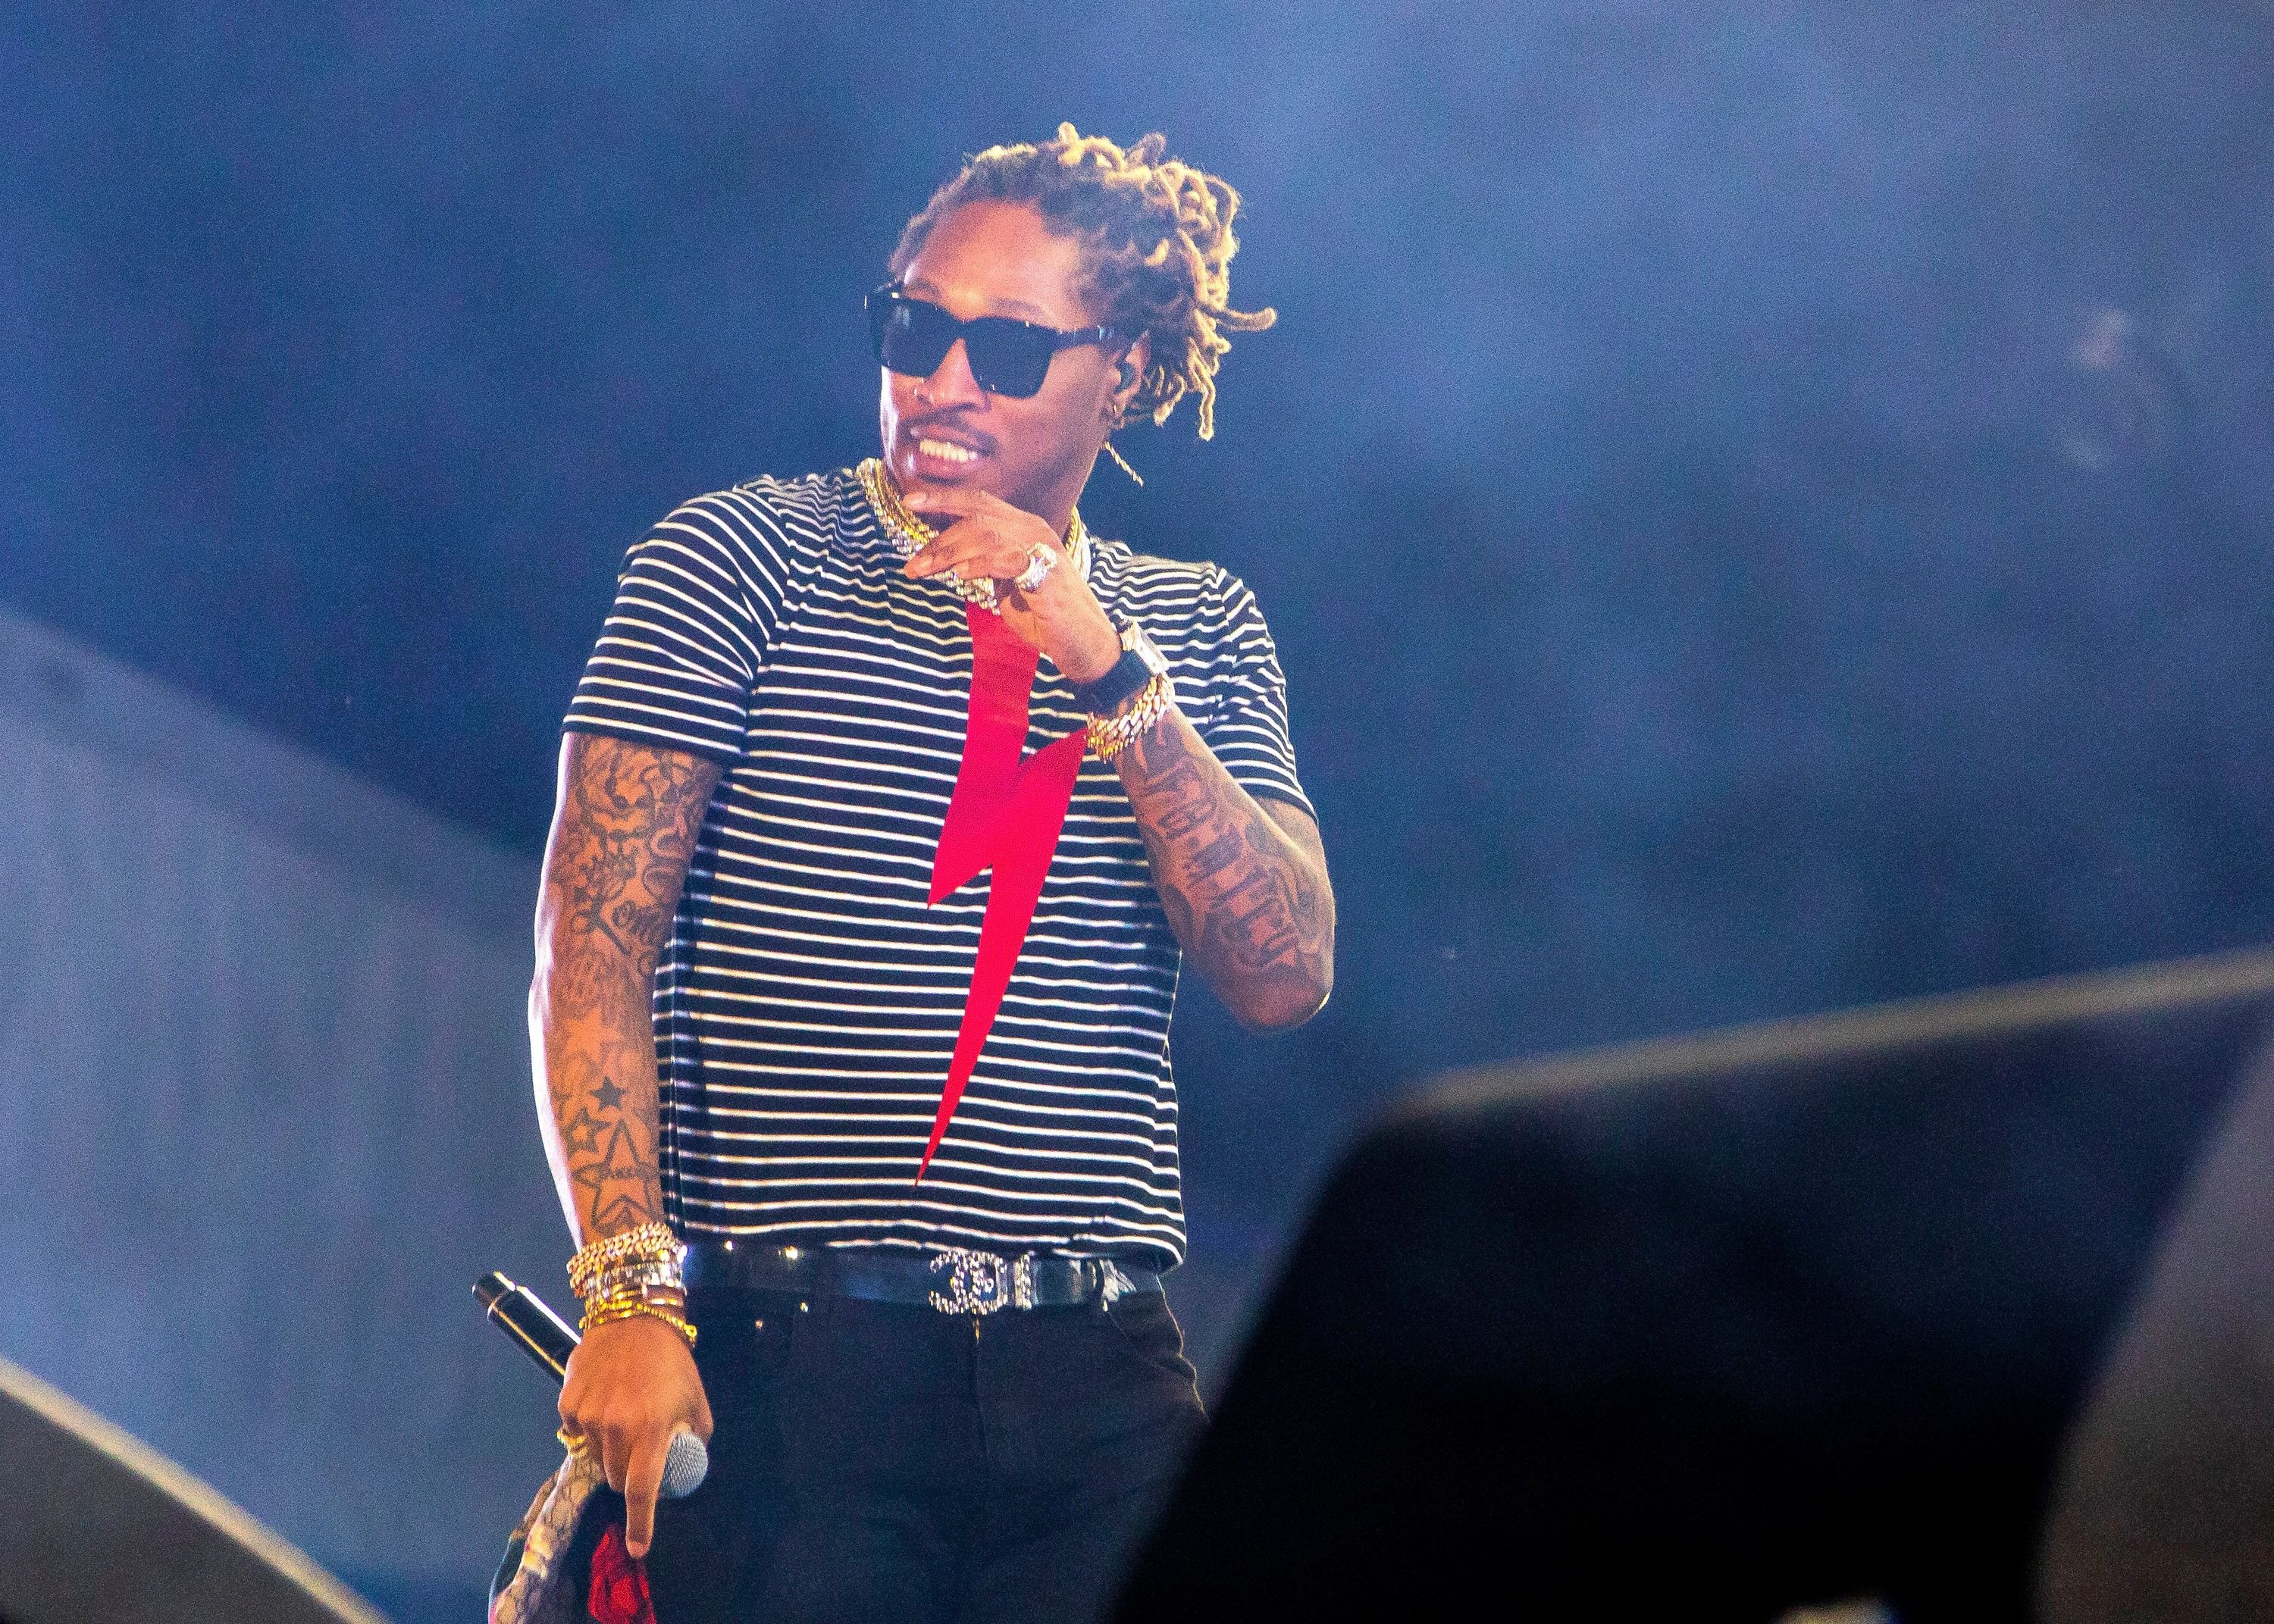  Rapper Future performing at the Festival d'ete de Quebec in 2018 in Quebec City, Canada | Source: Getty Images